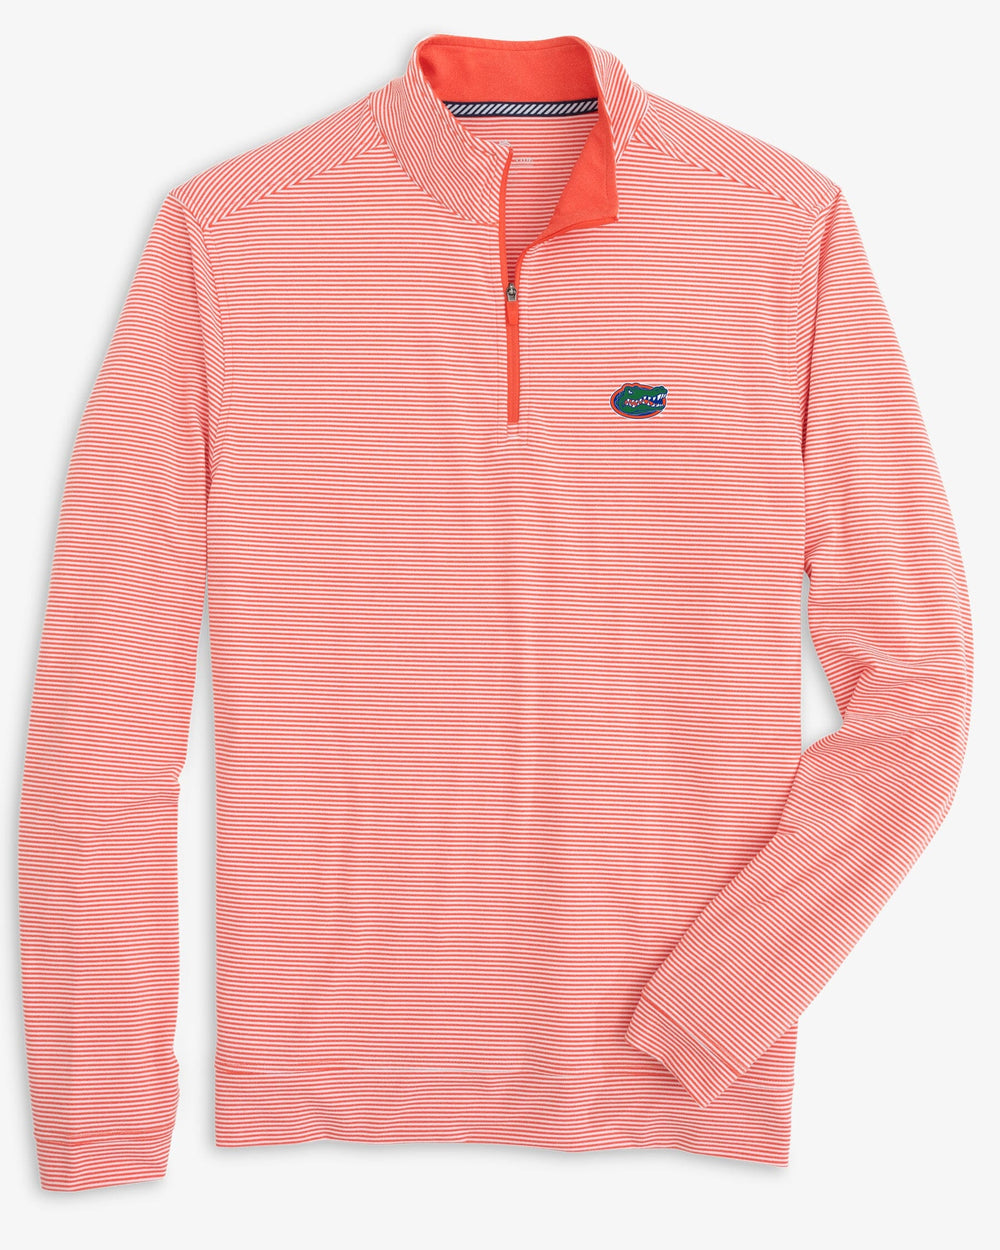 The front view of the Florida Gators Cruiser Micro-Stripe Heather Quarter Zip by Southern Tide - Heather Endzone Orange